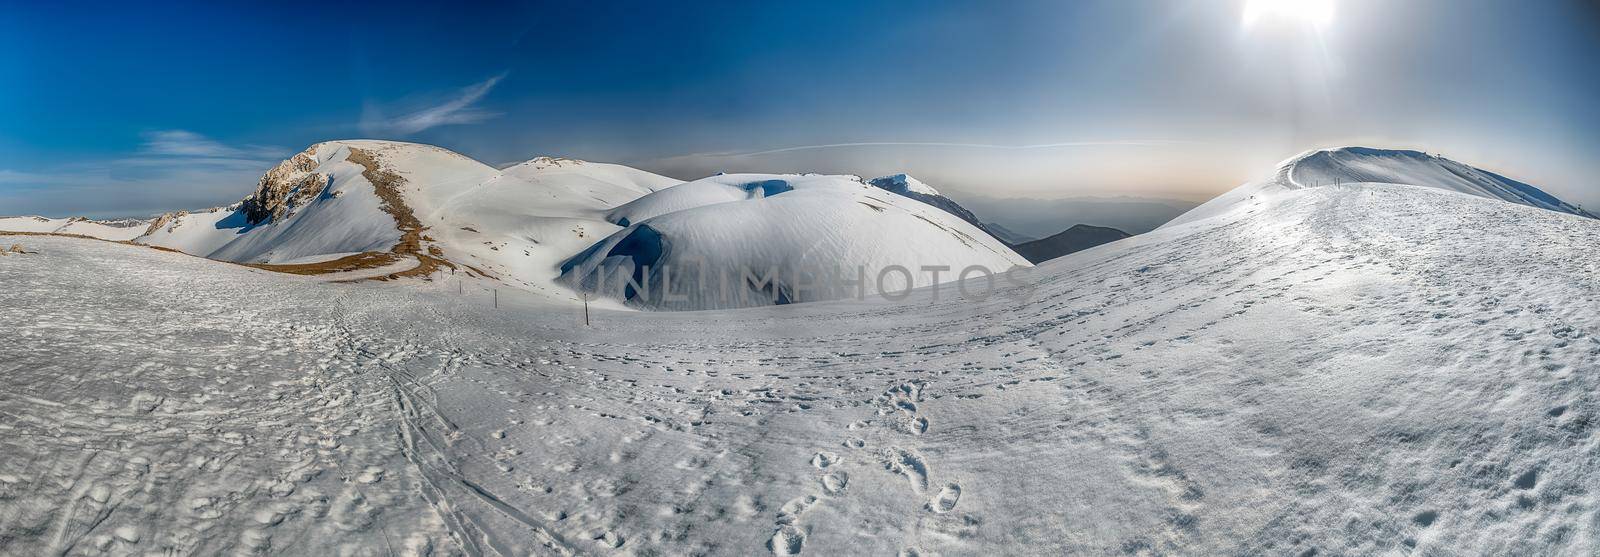 Scenic panoramic winter landscape with snow covered mountains, located in Campocatino, touristic ski town in the Central Apennines, Italy